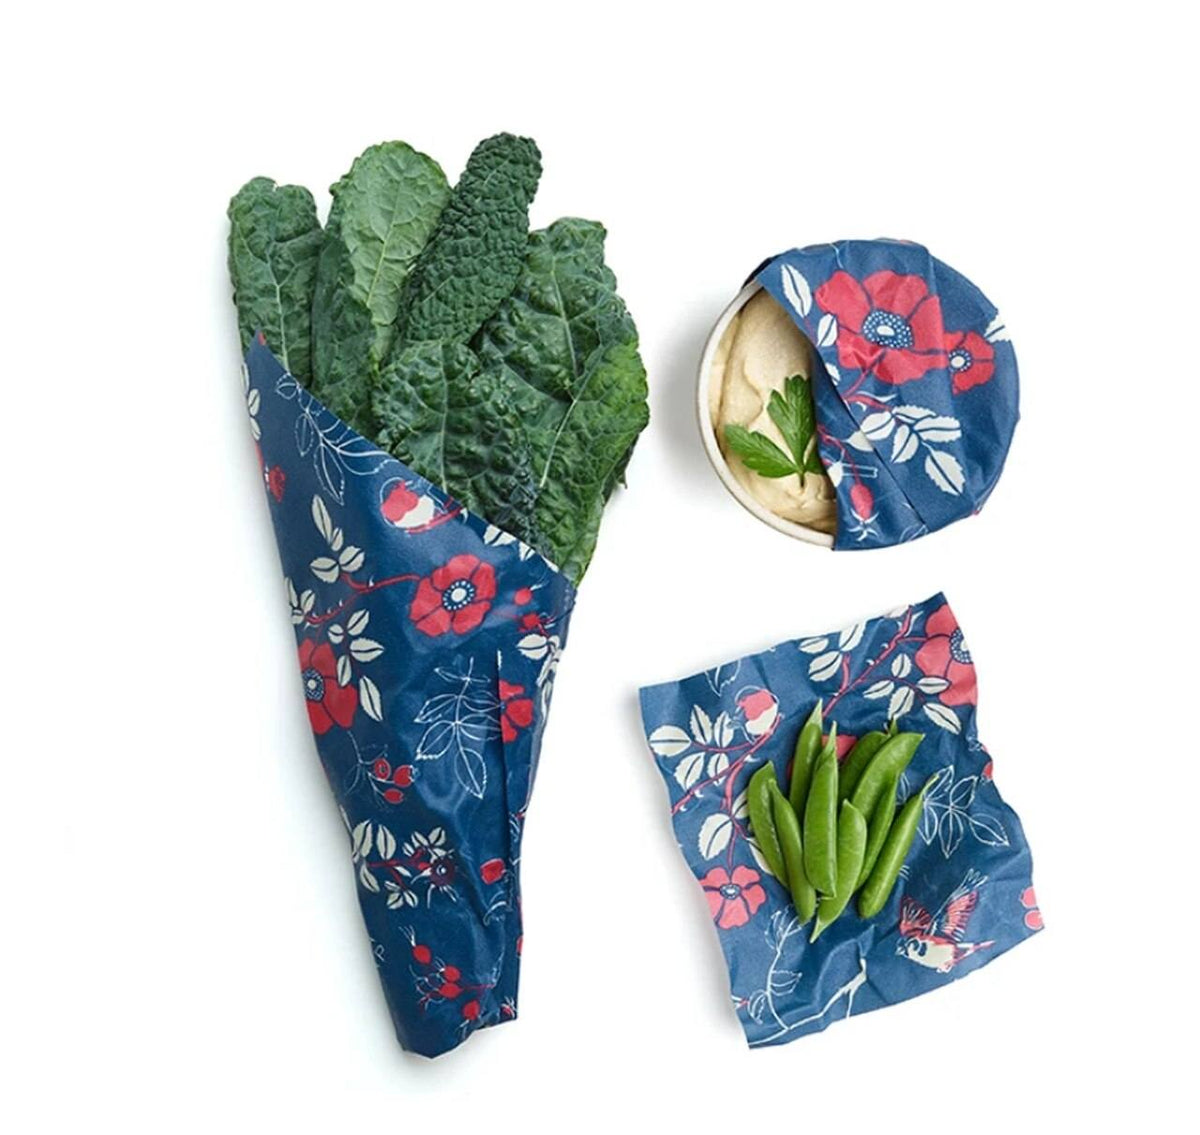 Bee's Wrap - Assorted Sizes - Pack of 3 - Birds and Botanical Print - Gift & Gather